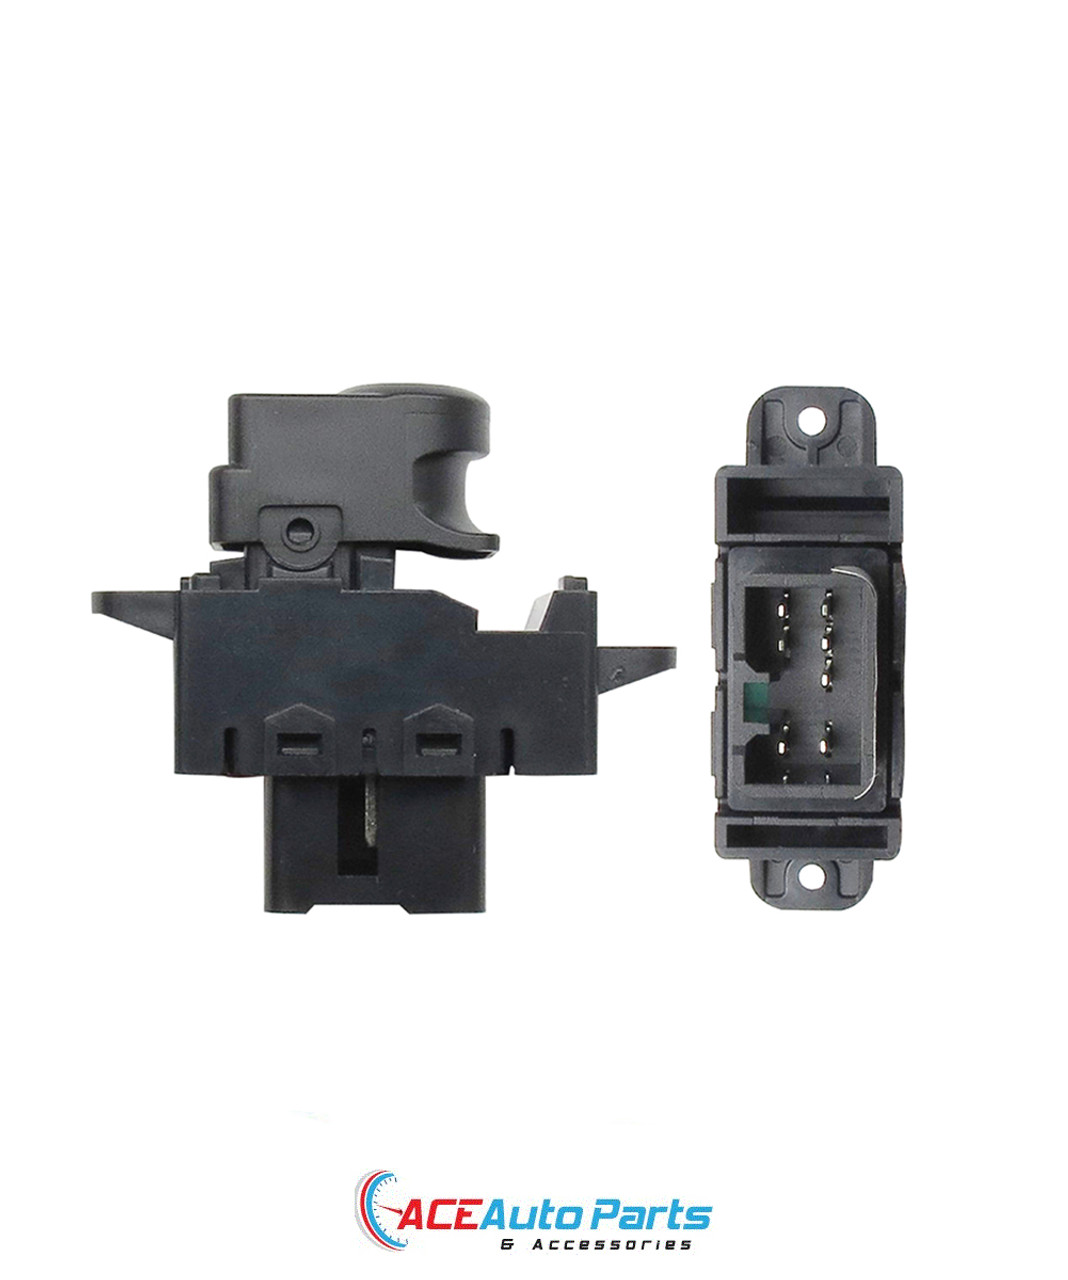 Power Window Switch Rear for Hyundai Accent 2011 to 2016